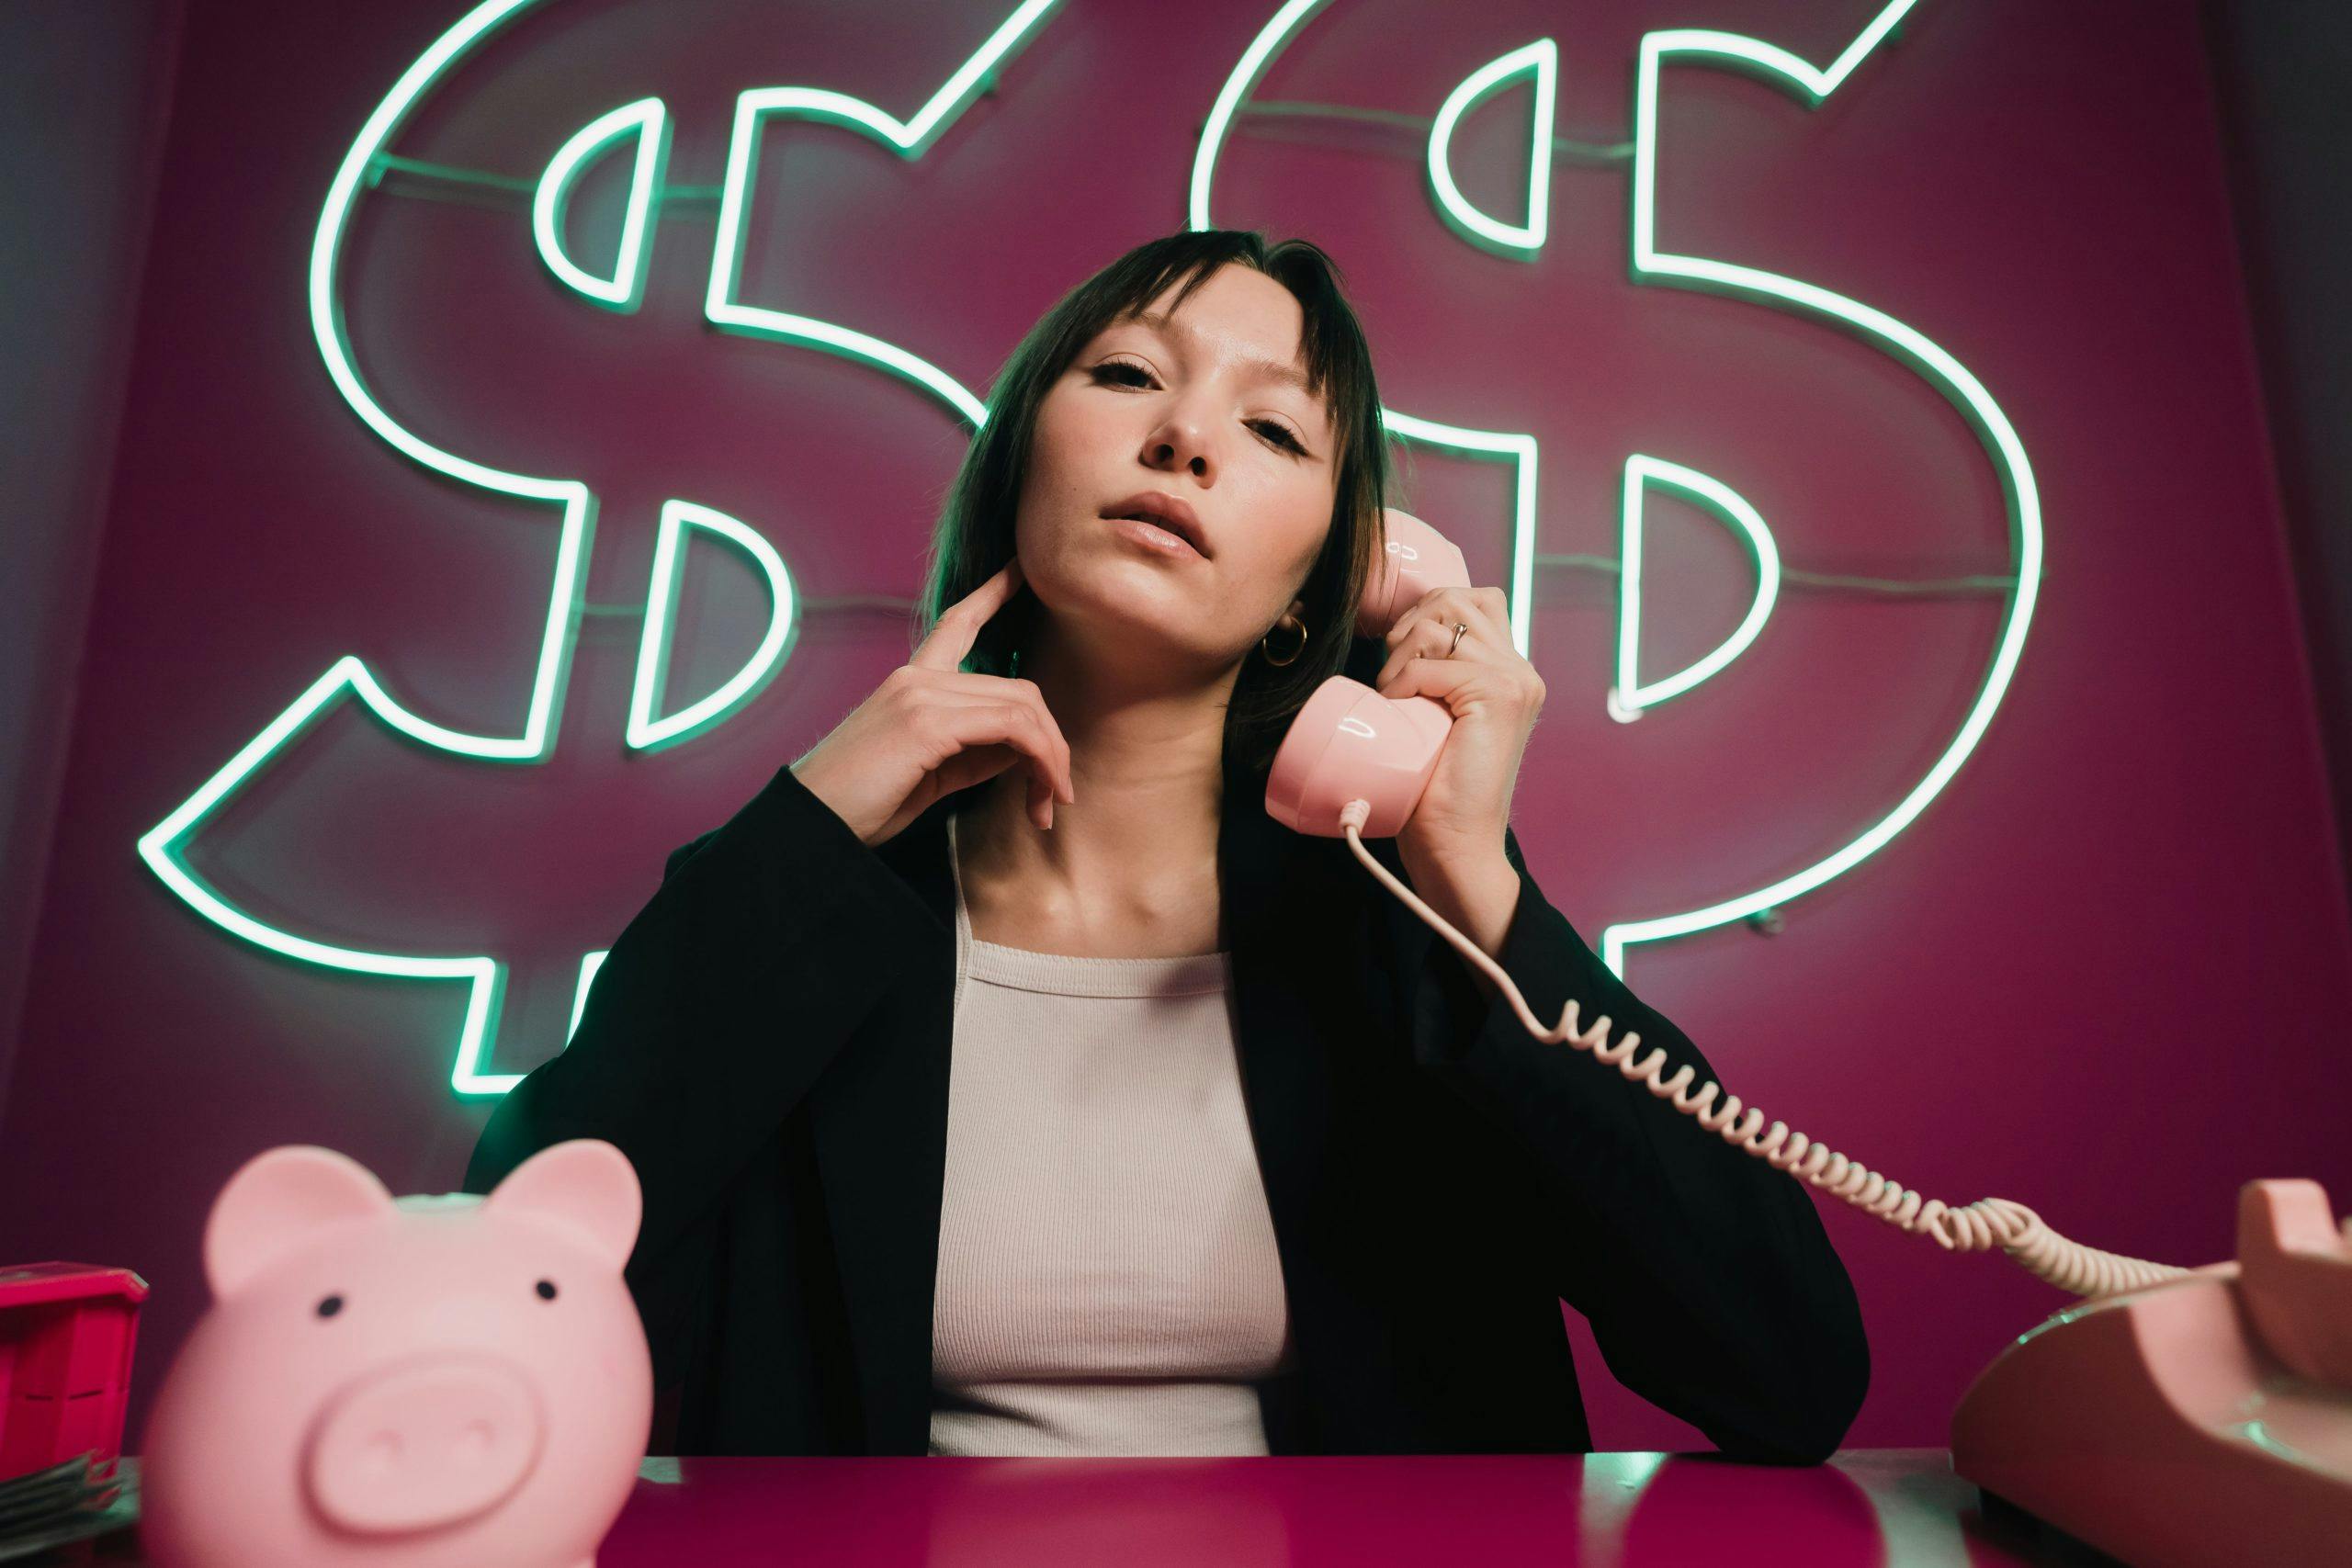 A woman taking a call on a pink telephone. There is a piggy bank on the desk and dollar signs in the background.